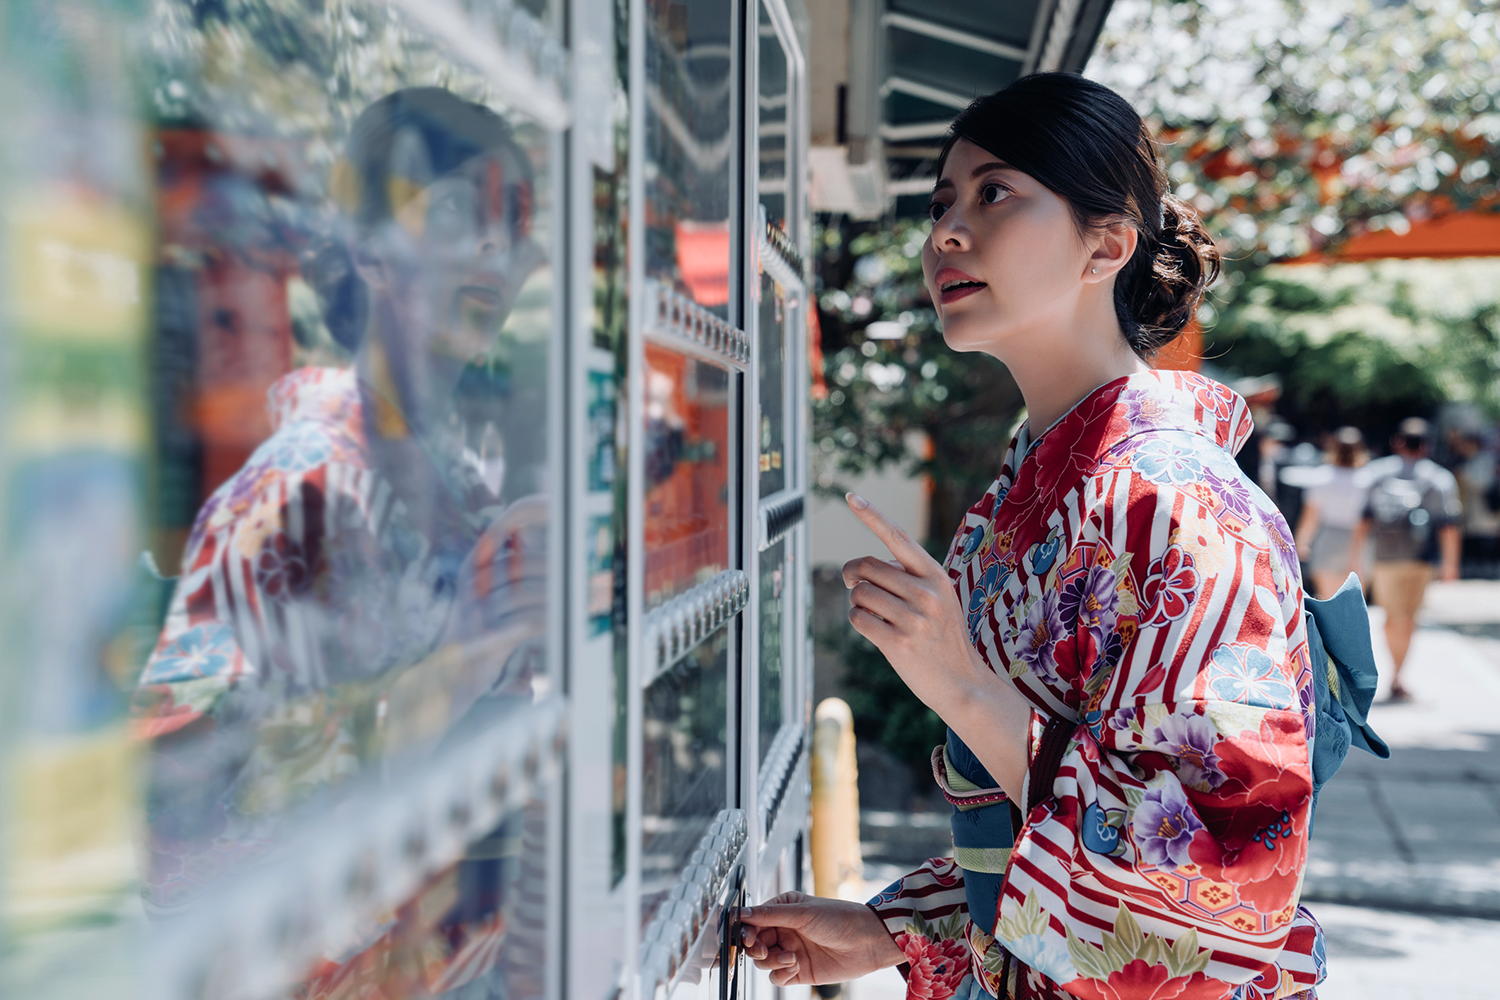 Japan's Vending Machine Designs Are Like No Other Country's